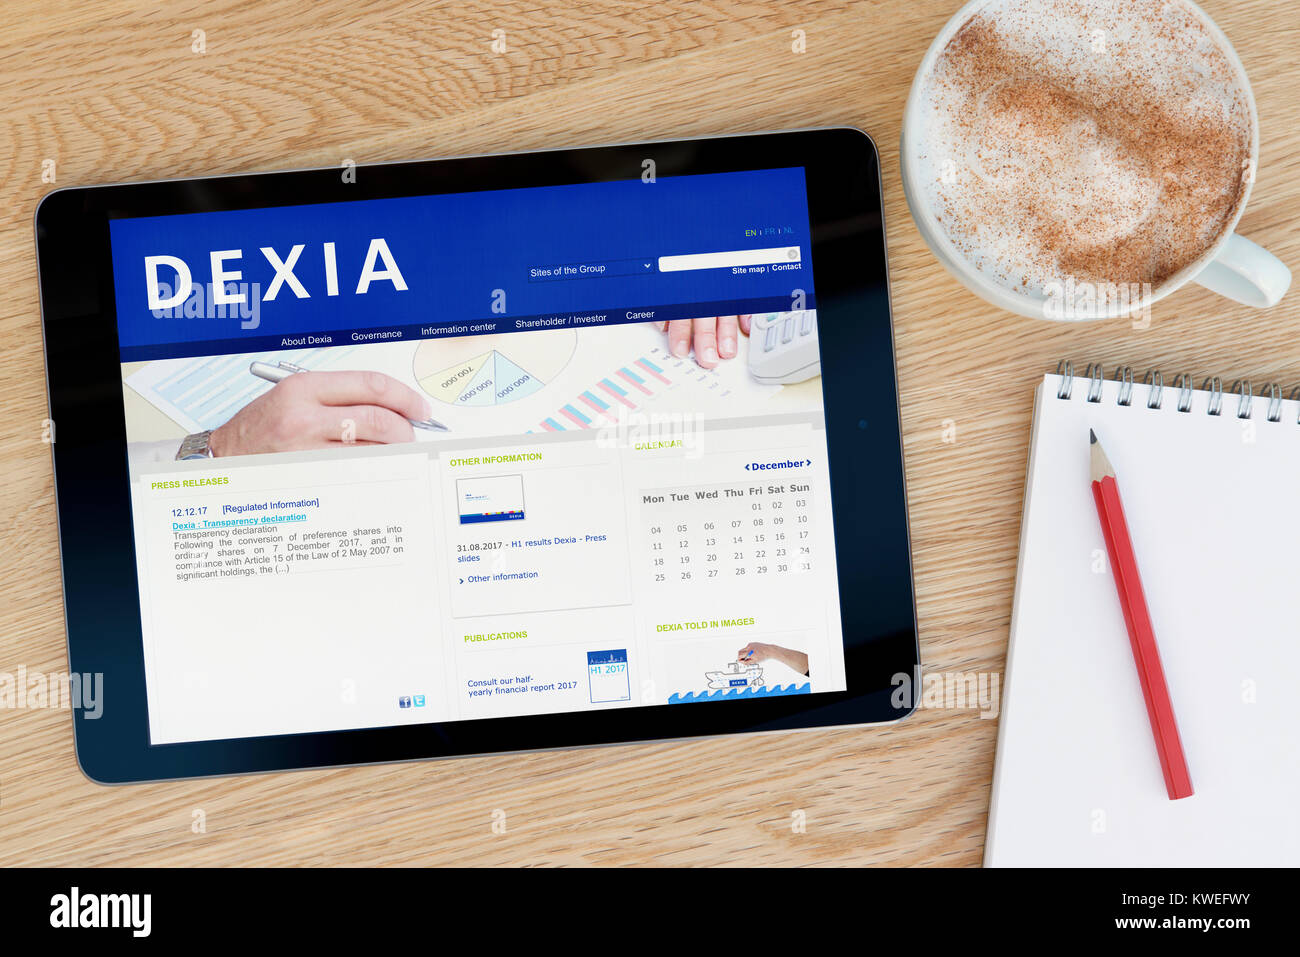 The Dexia Bank website on an iPad tablet device, resting on a wooden table beside a notepad, pencil and cup of coffee (Editorial only) Stock Photo